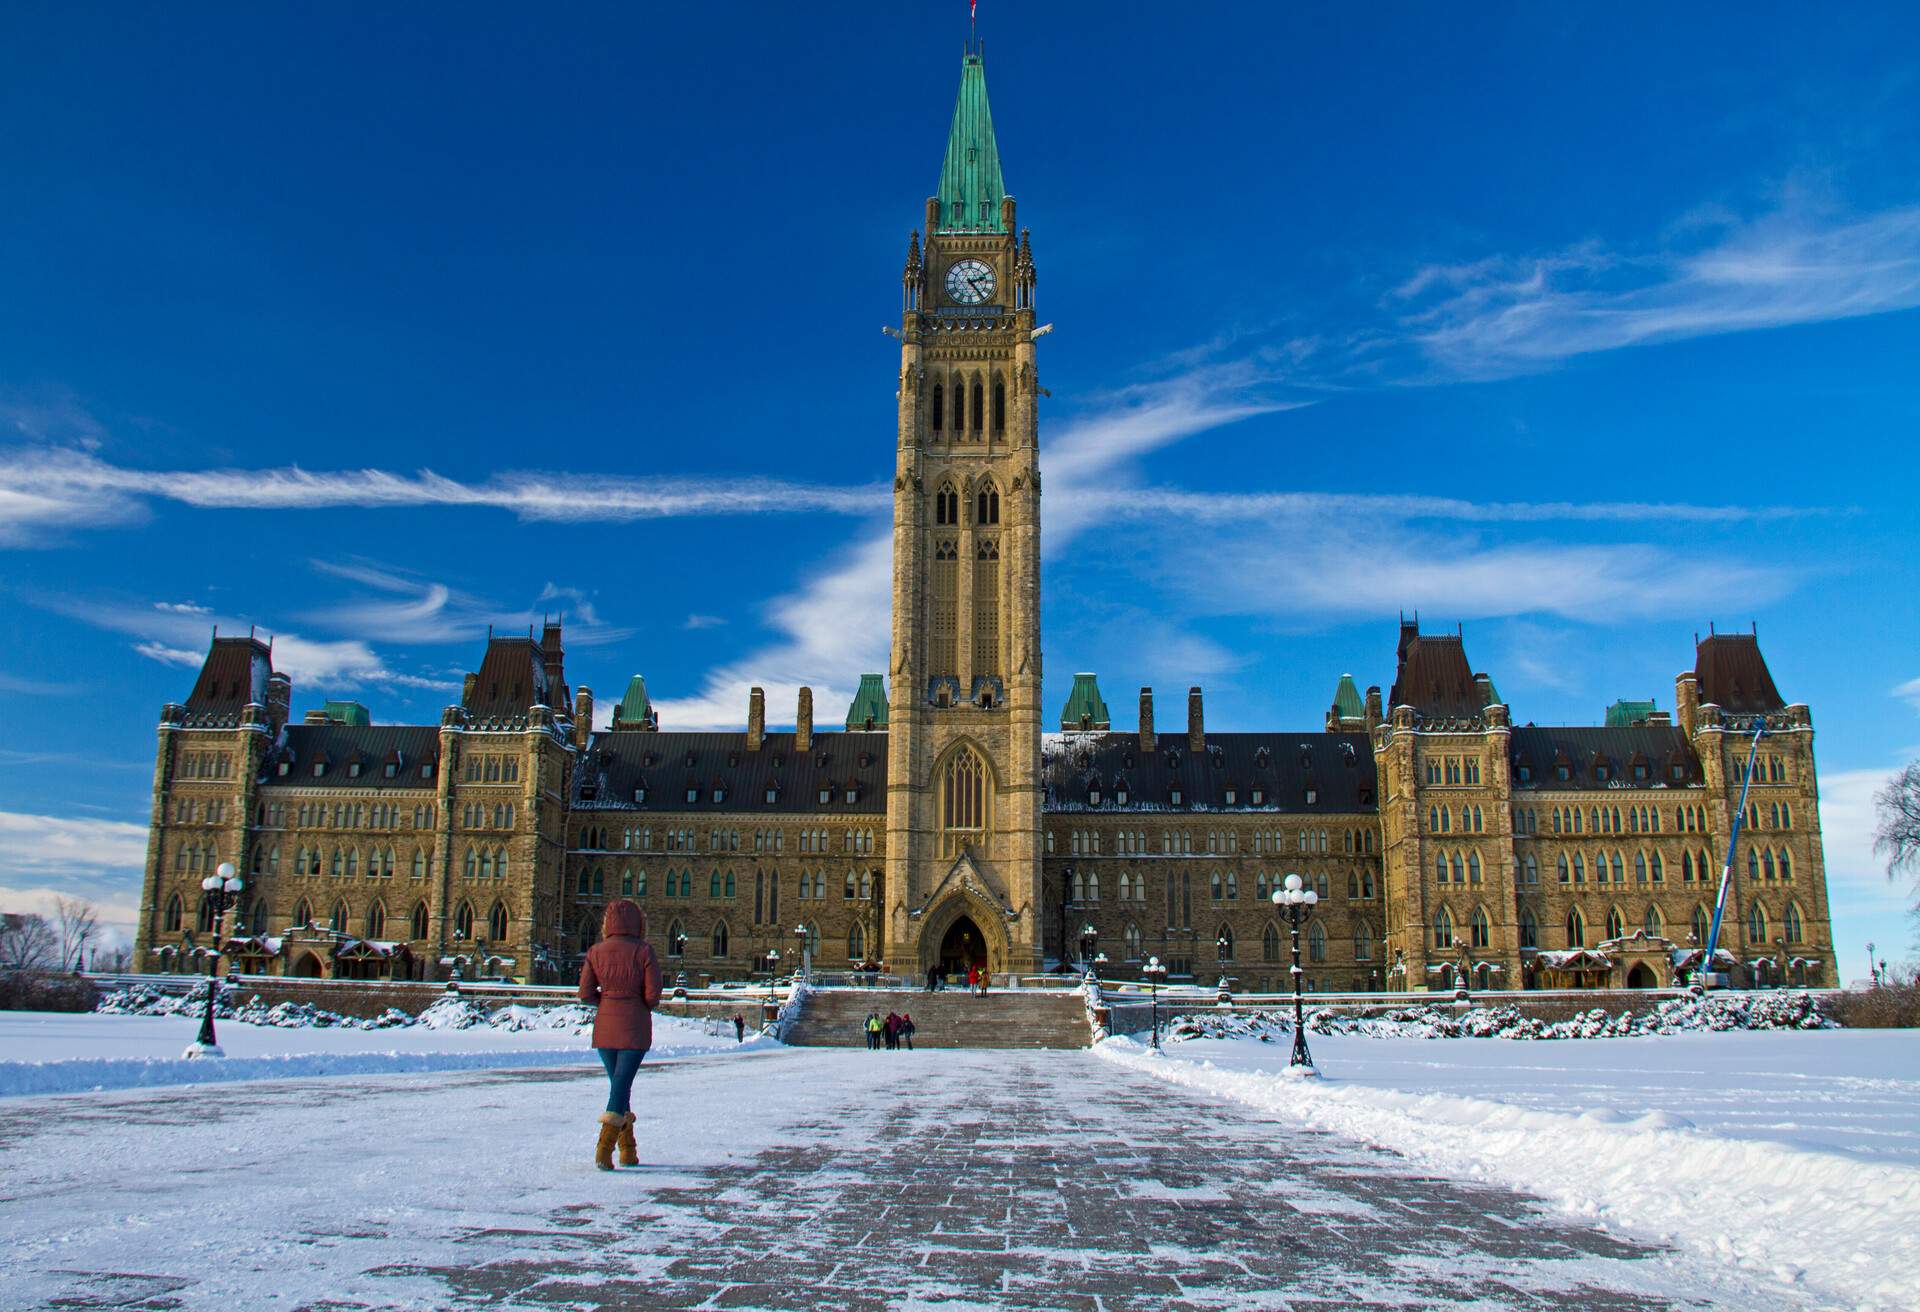 A woman bundled up in winter clothes walks in front of the Canadian Parliament Building on Ottawa